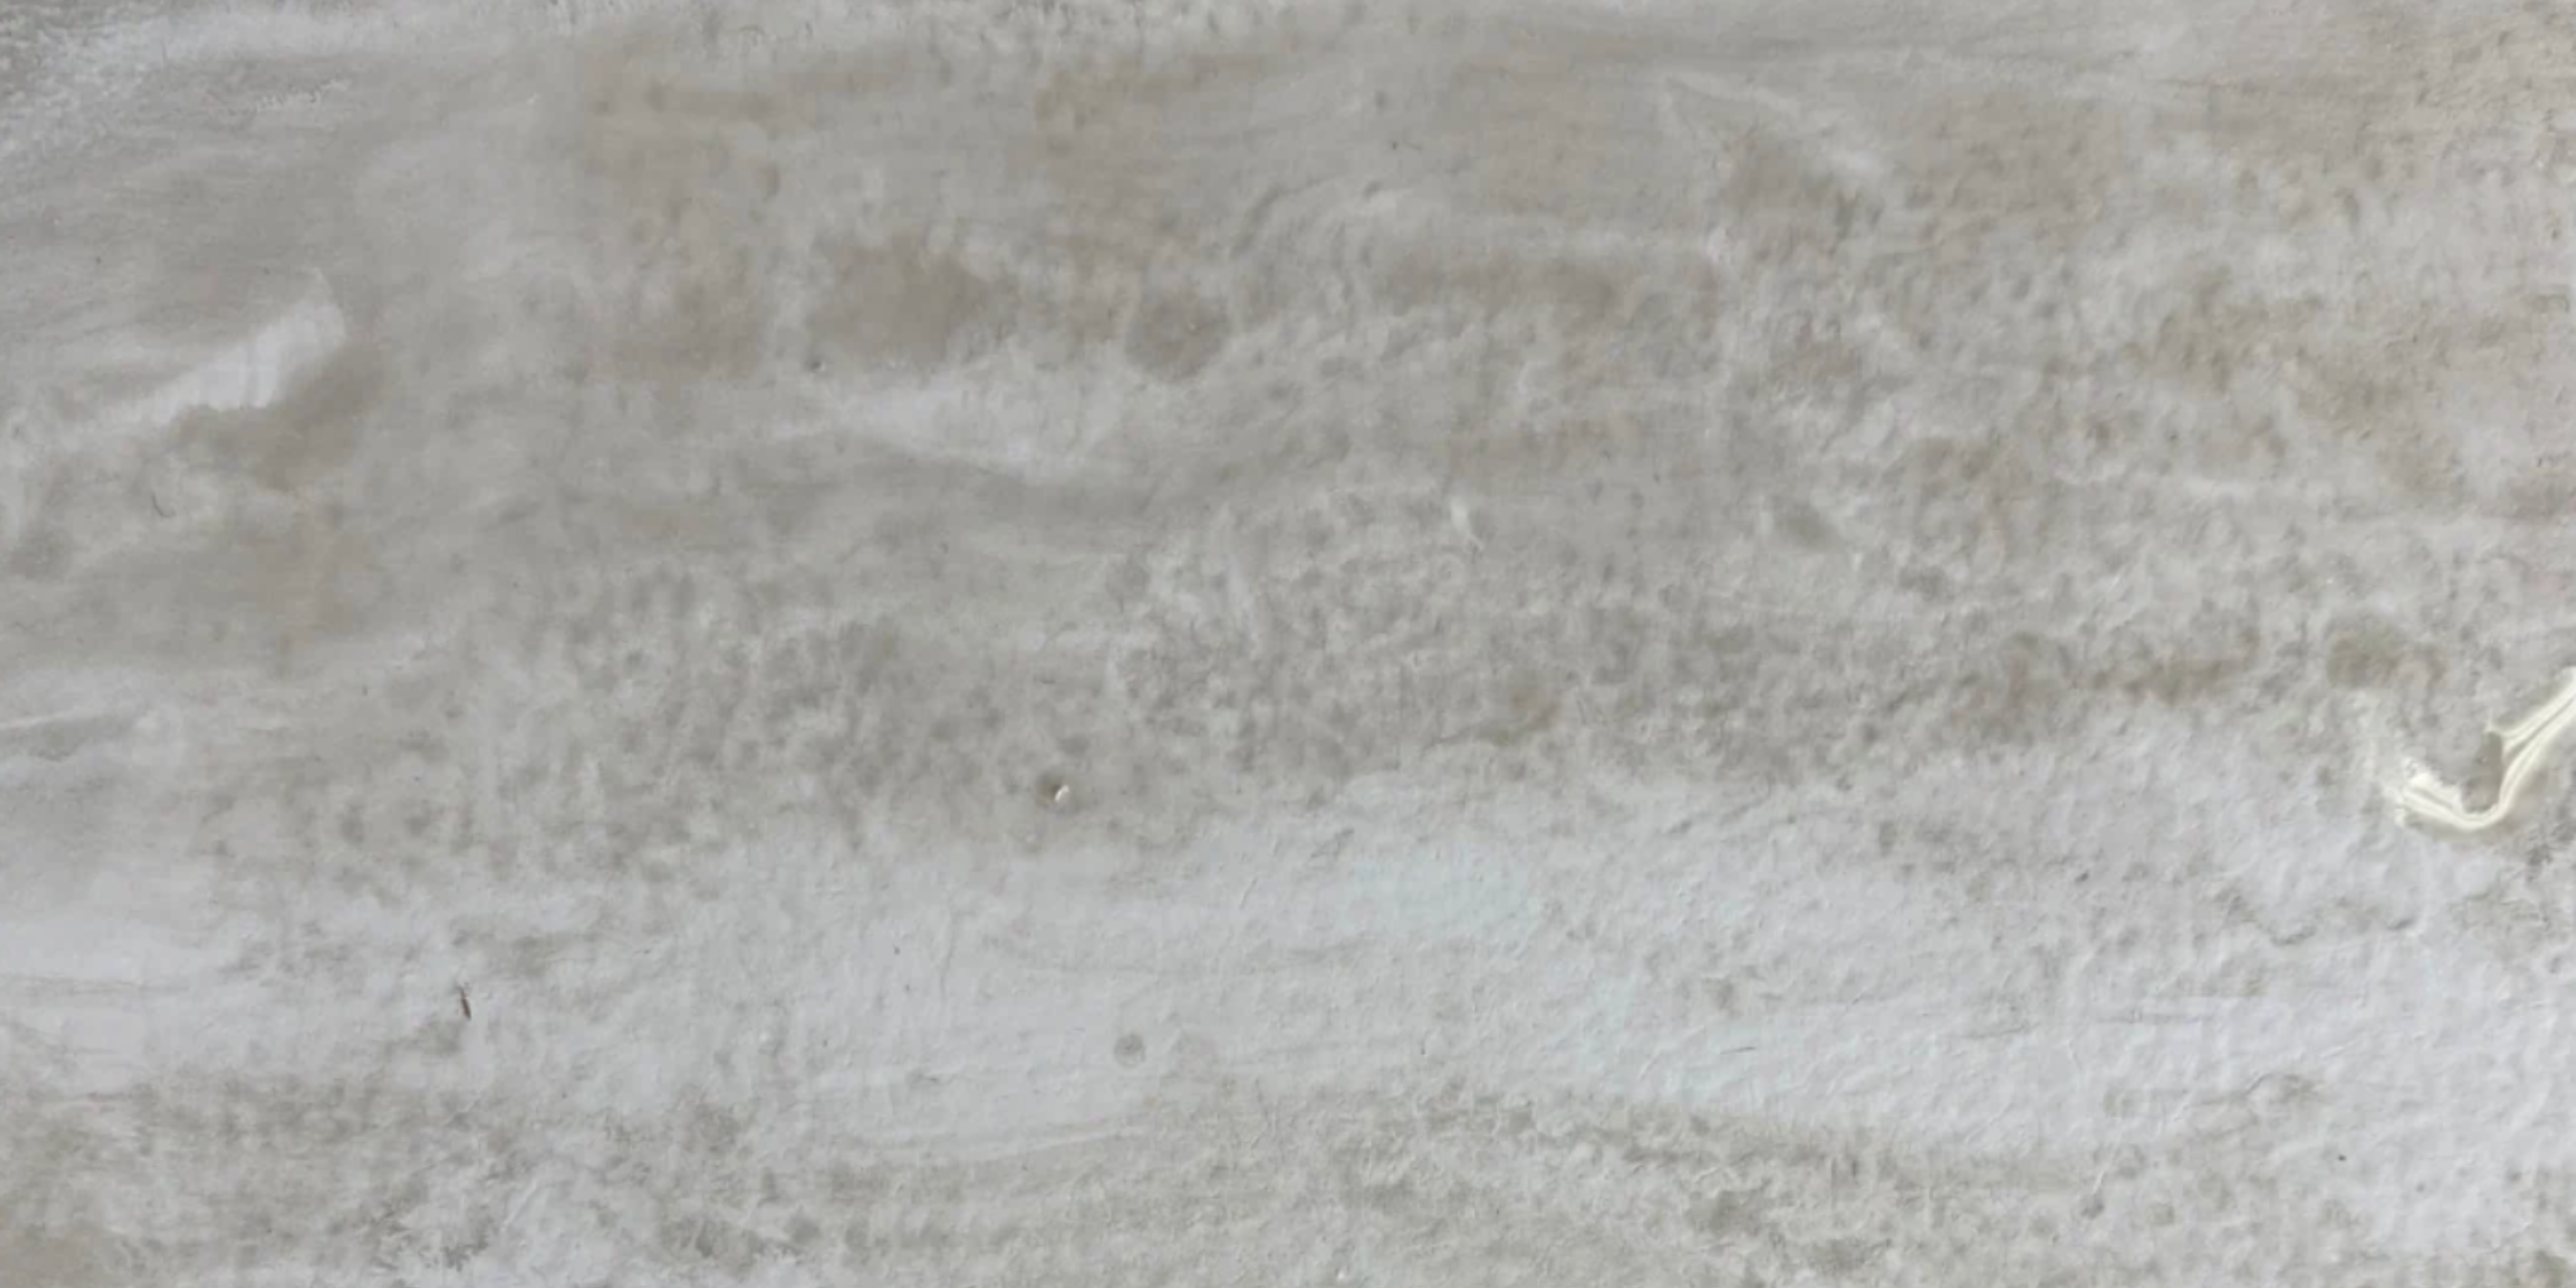 Creating a Travertine Stone with One Step Paint